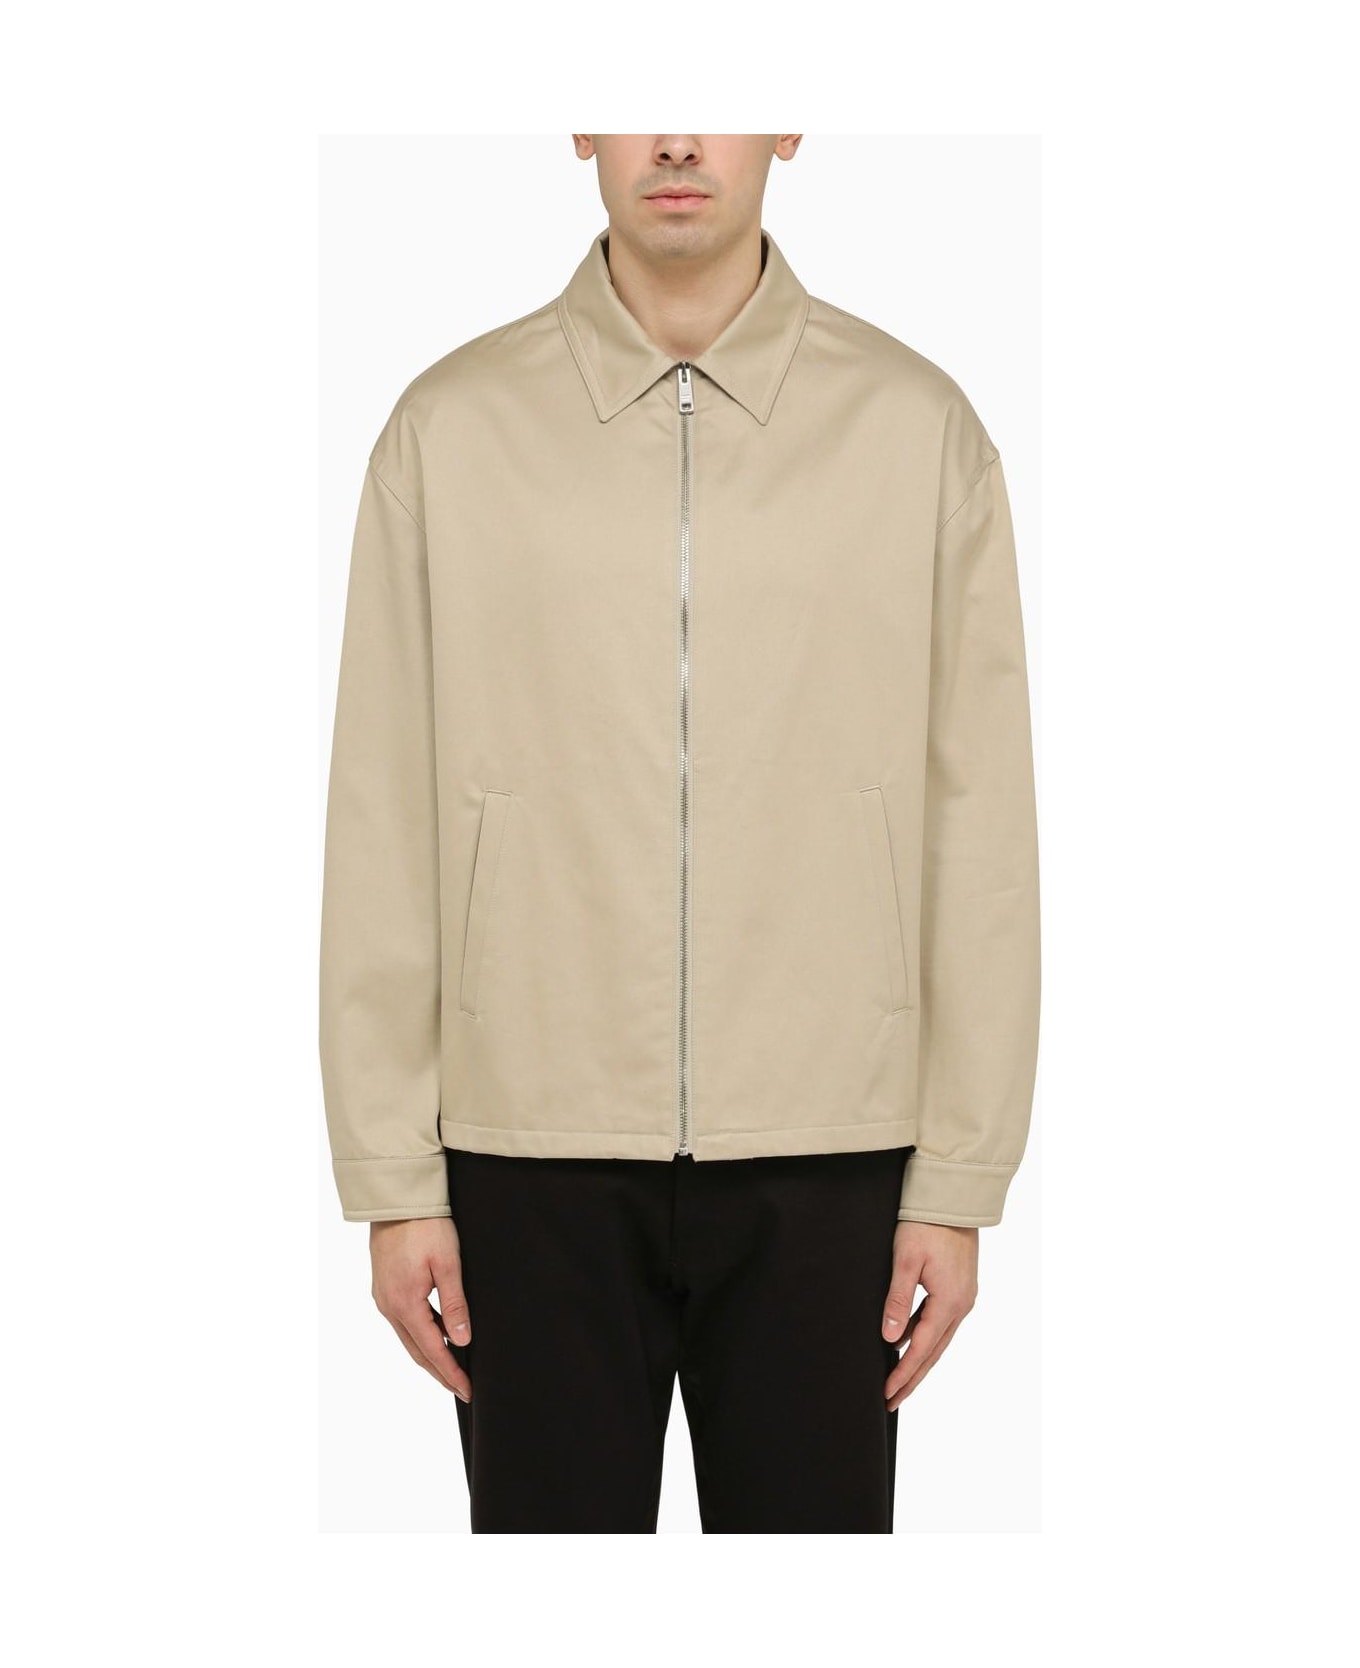 Prada Lightweight Cotton Jacket In Rope Colour - NATURAL